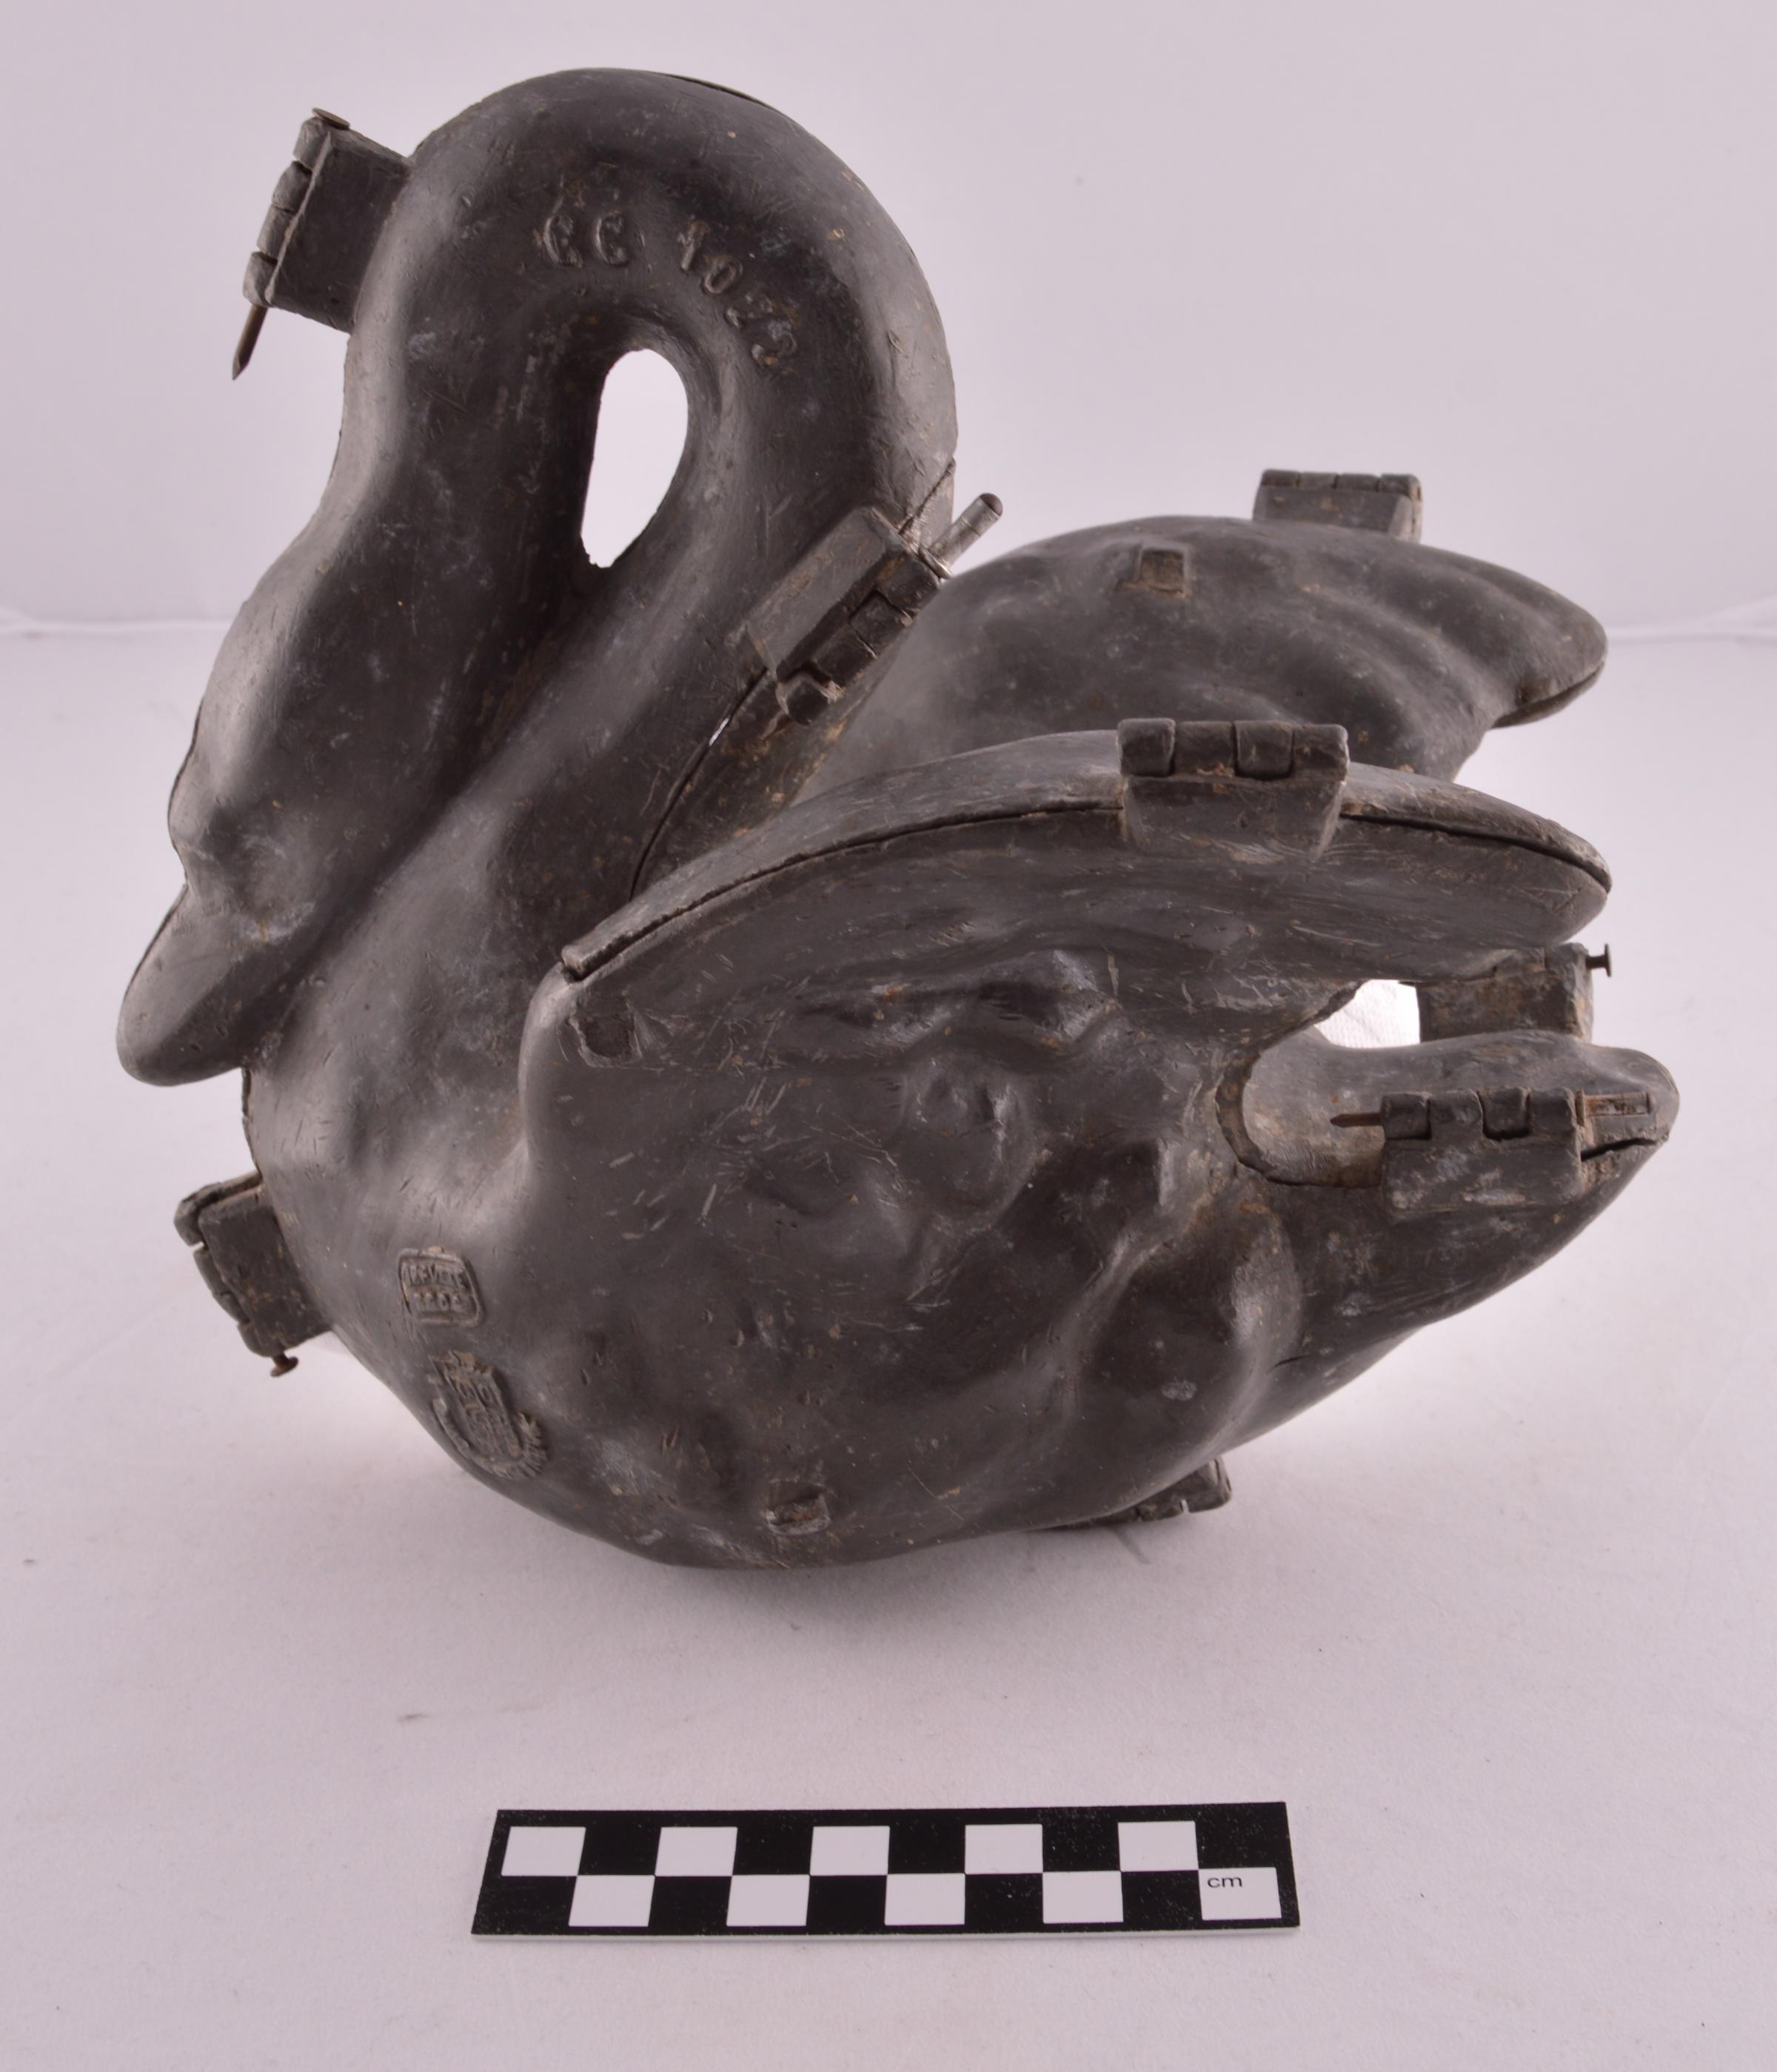 Swan shaped ice-cream mould from the Victorian era, part of a new collection of kitchen and dairy objects on display at Kiplin Hall